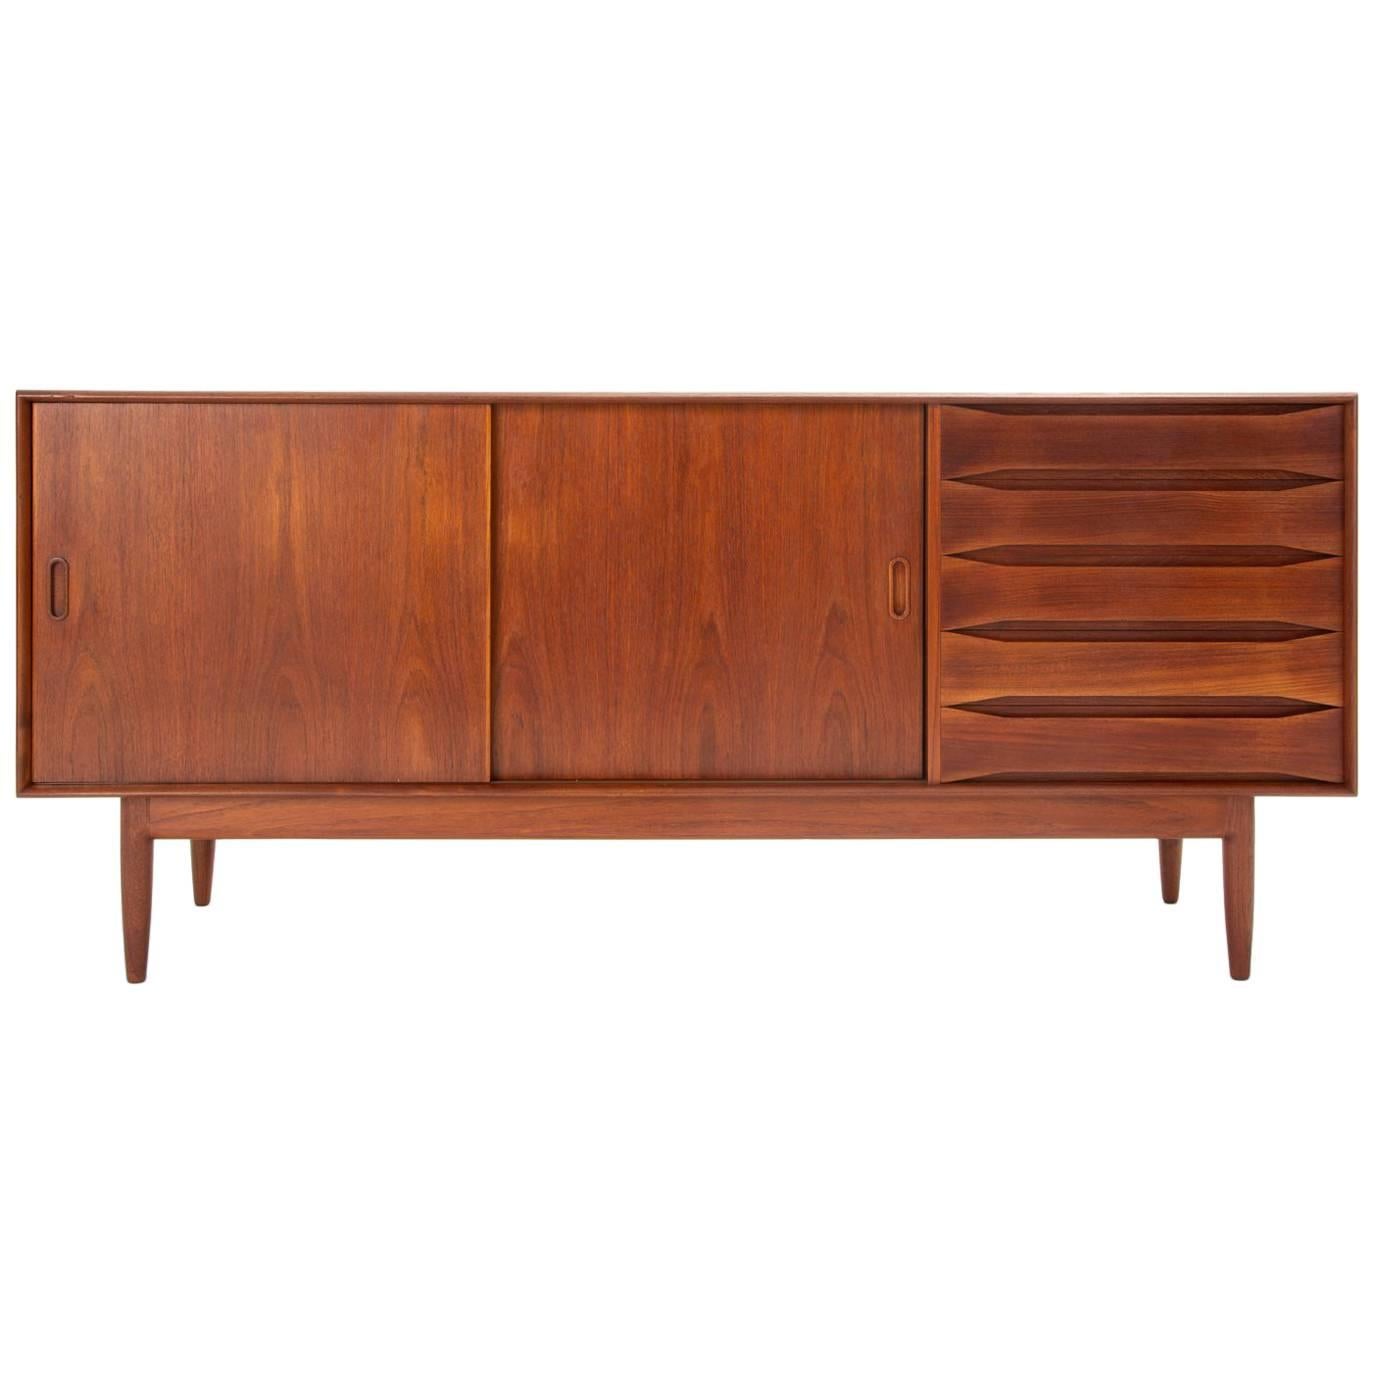 Danish Modern Teak Credenza with Bowtie Drawers by Johannes Aasbjerg